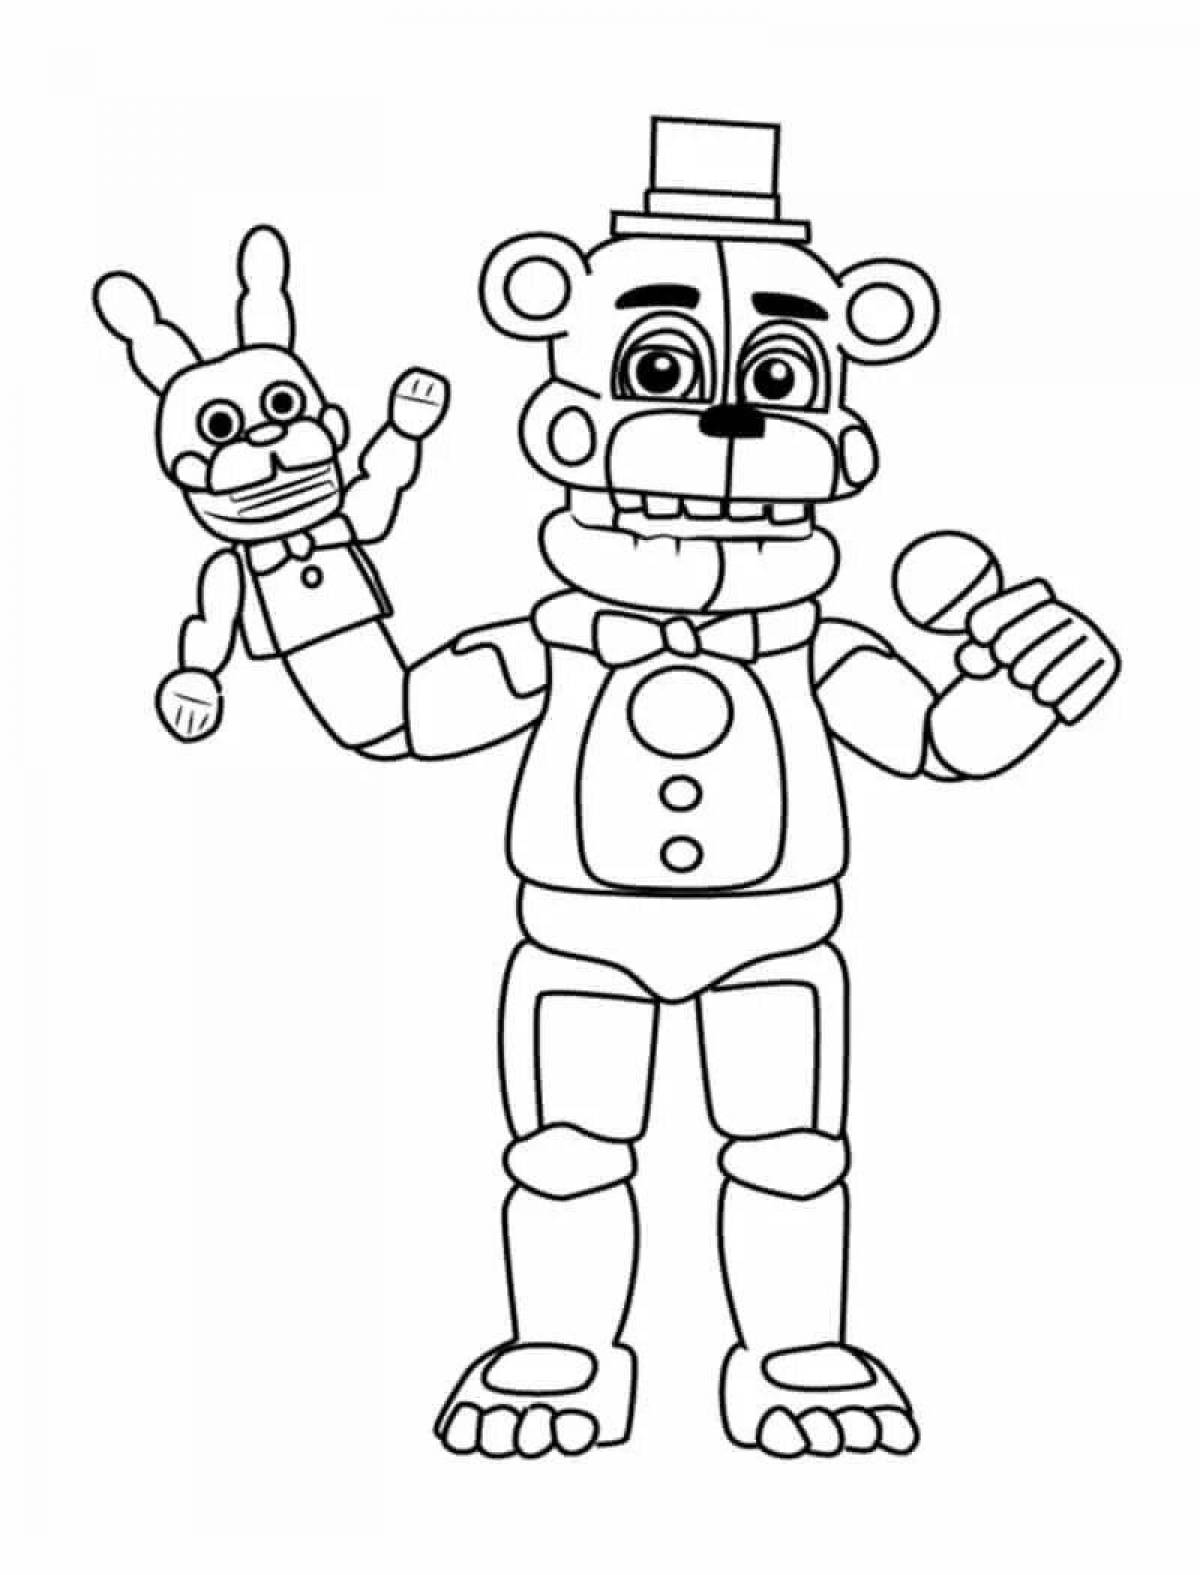 Attractive freddy robot coloring page